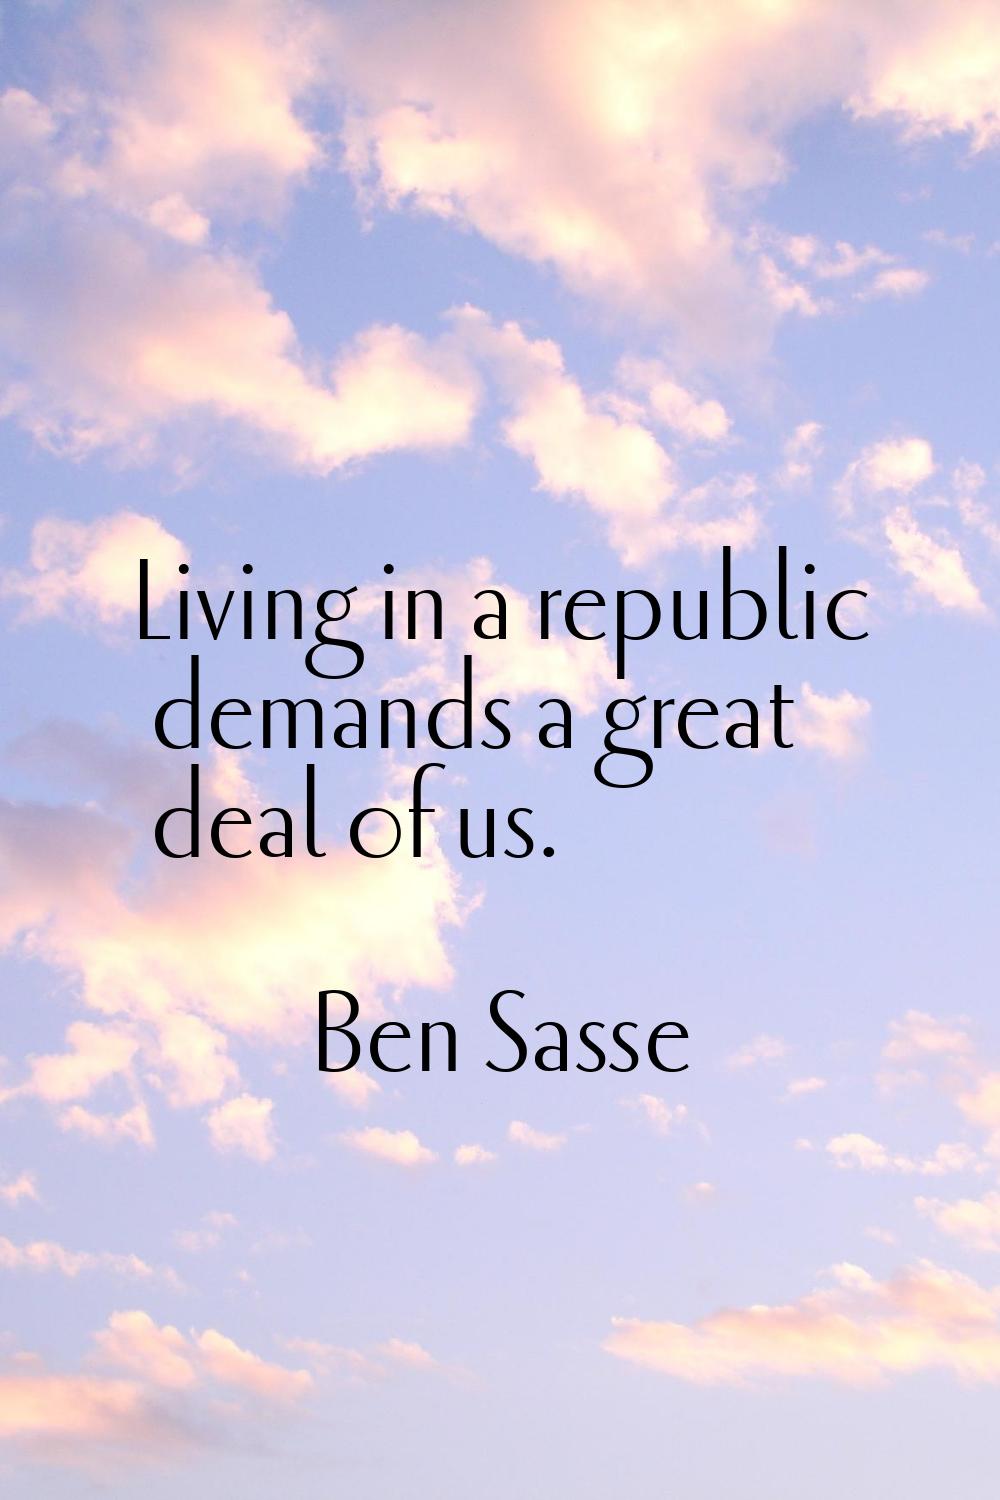 Living in a republic demands a great deal of us.